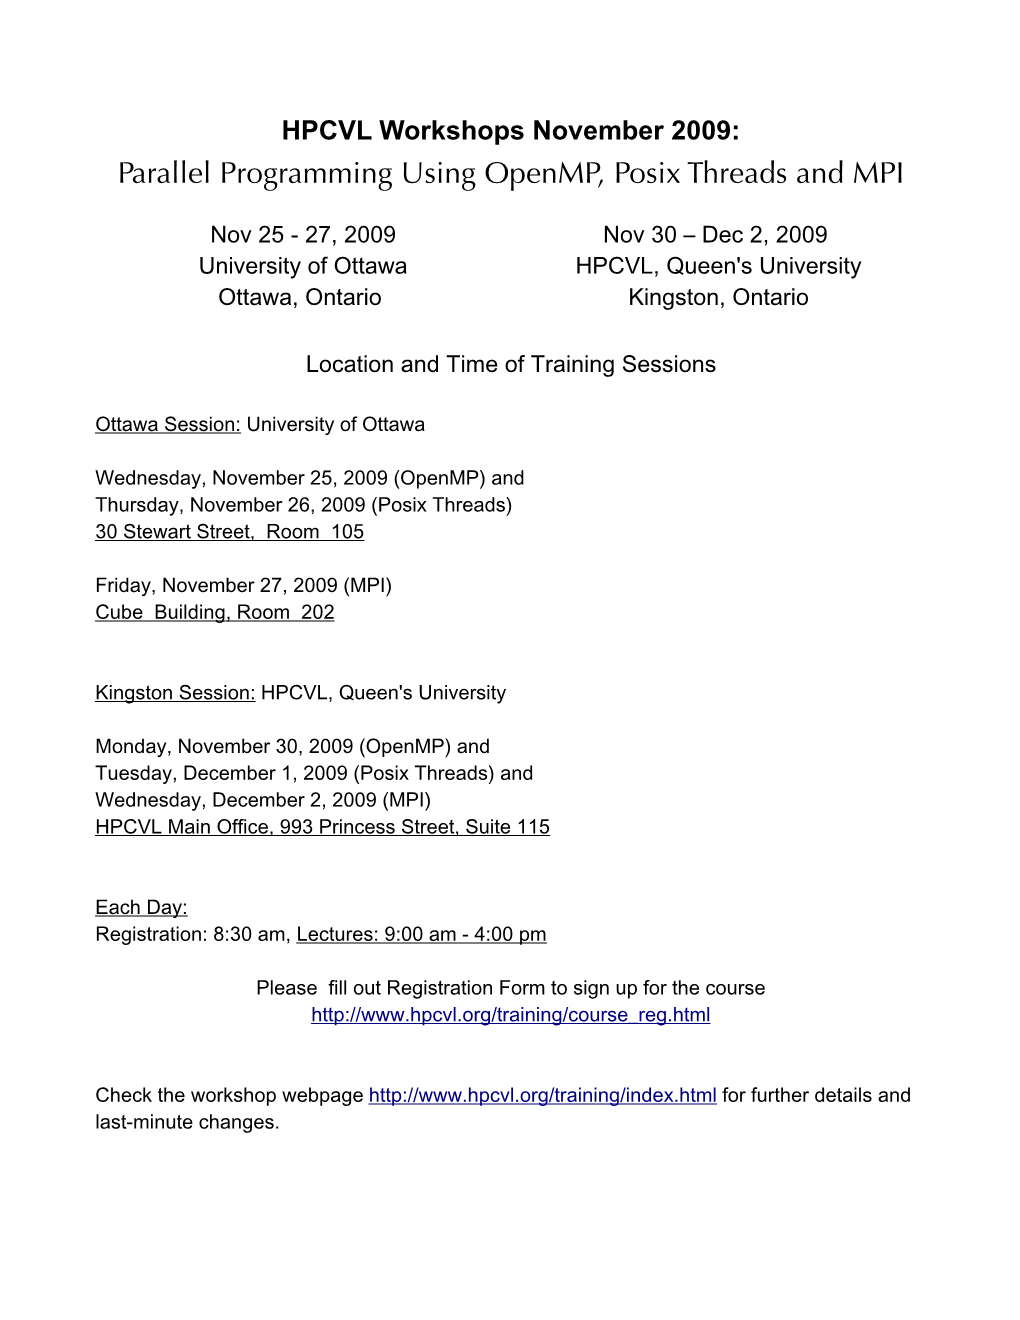 Parallel Programming Using Openmp, Posix Threads and MPI